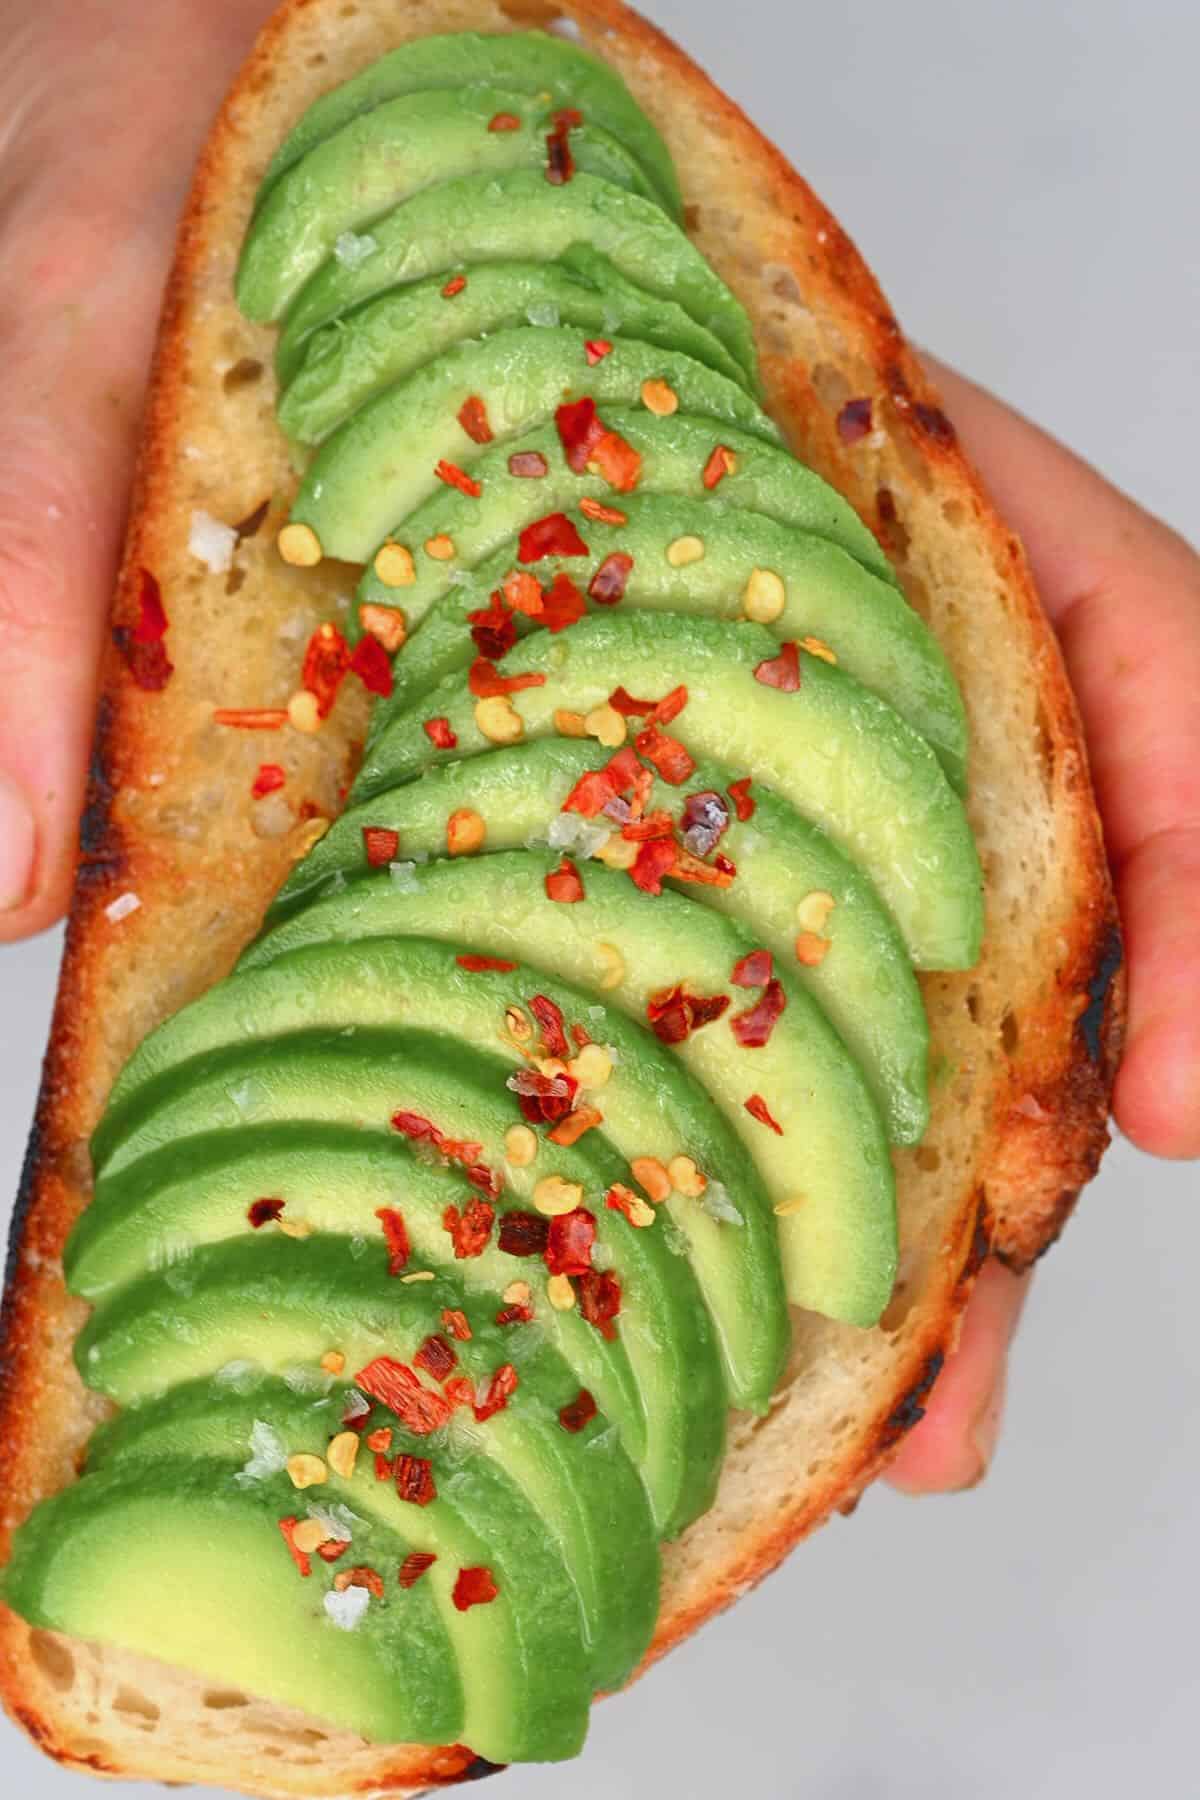 An avocado toast topped with chili flakes